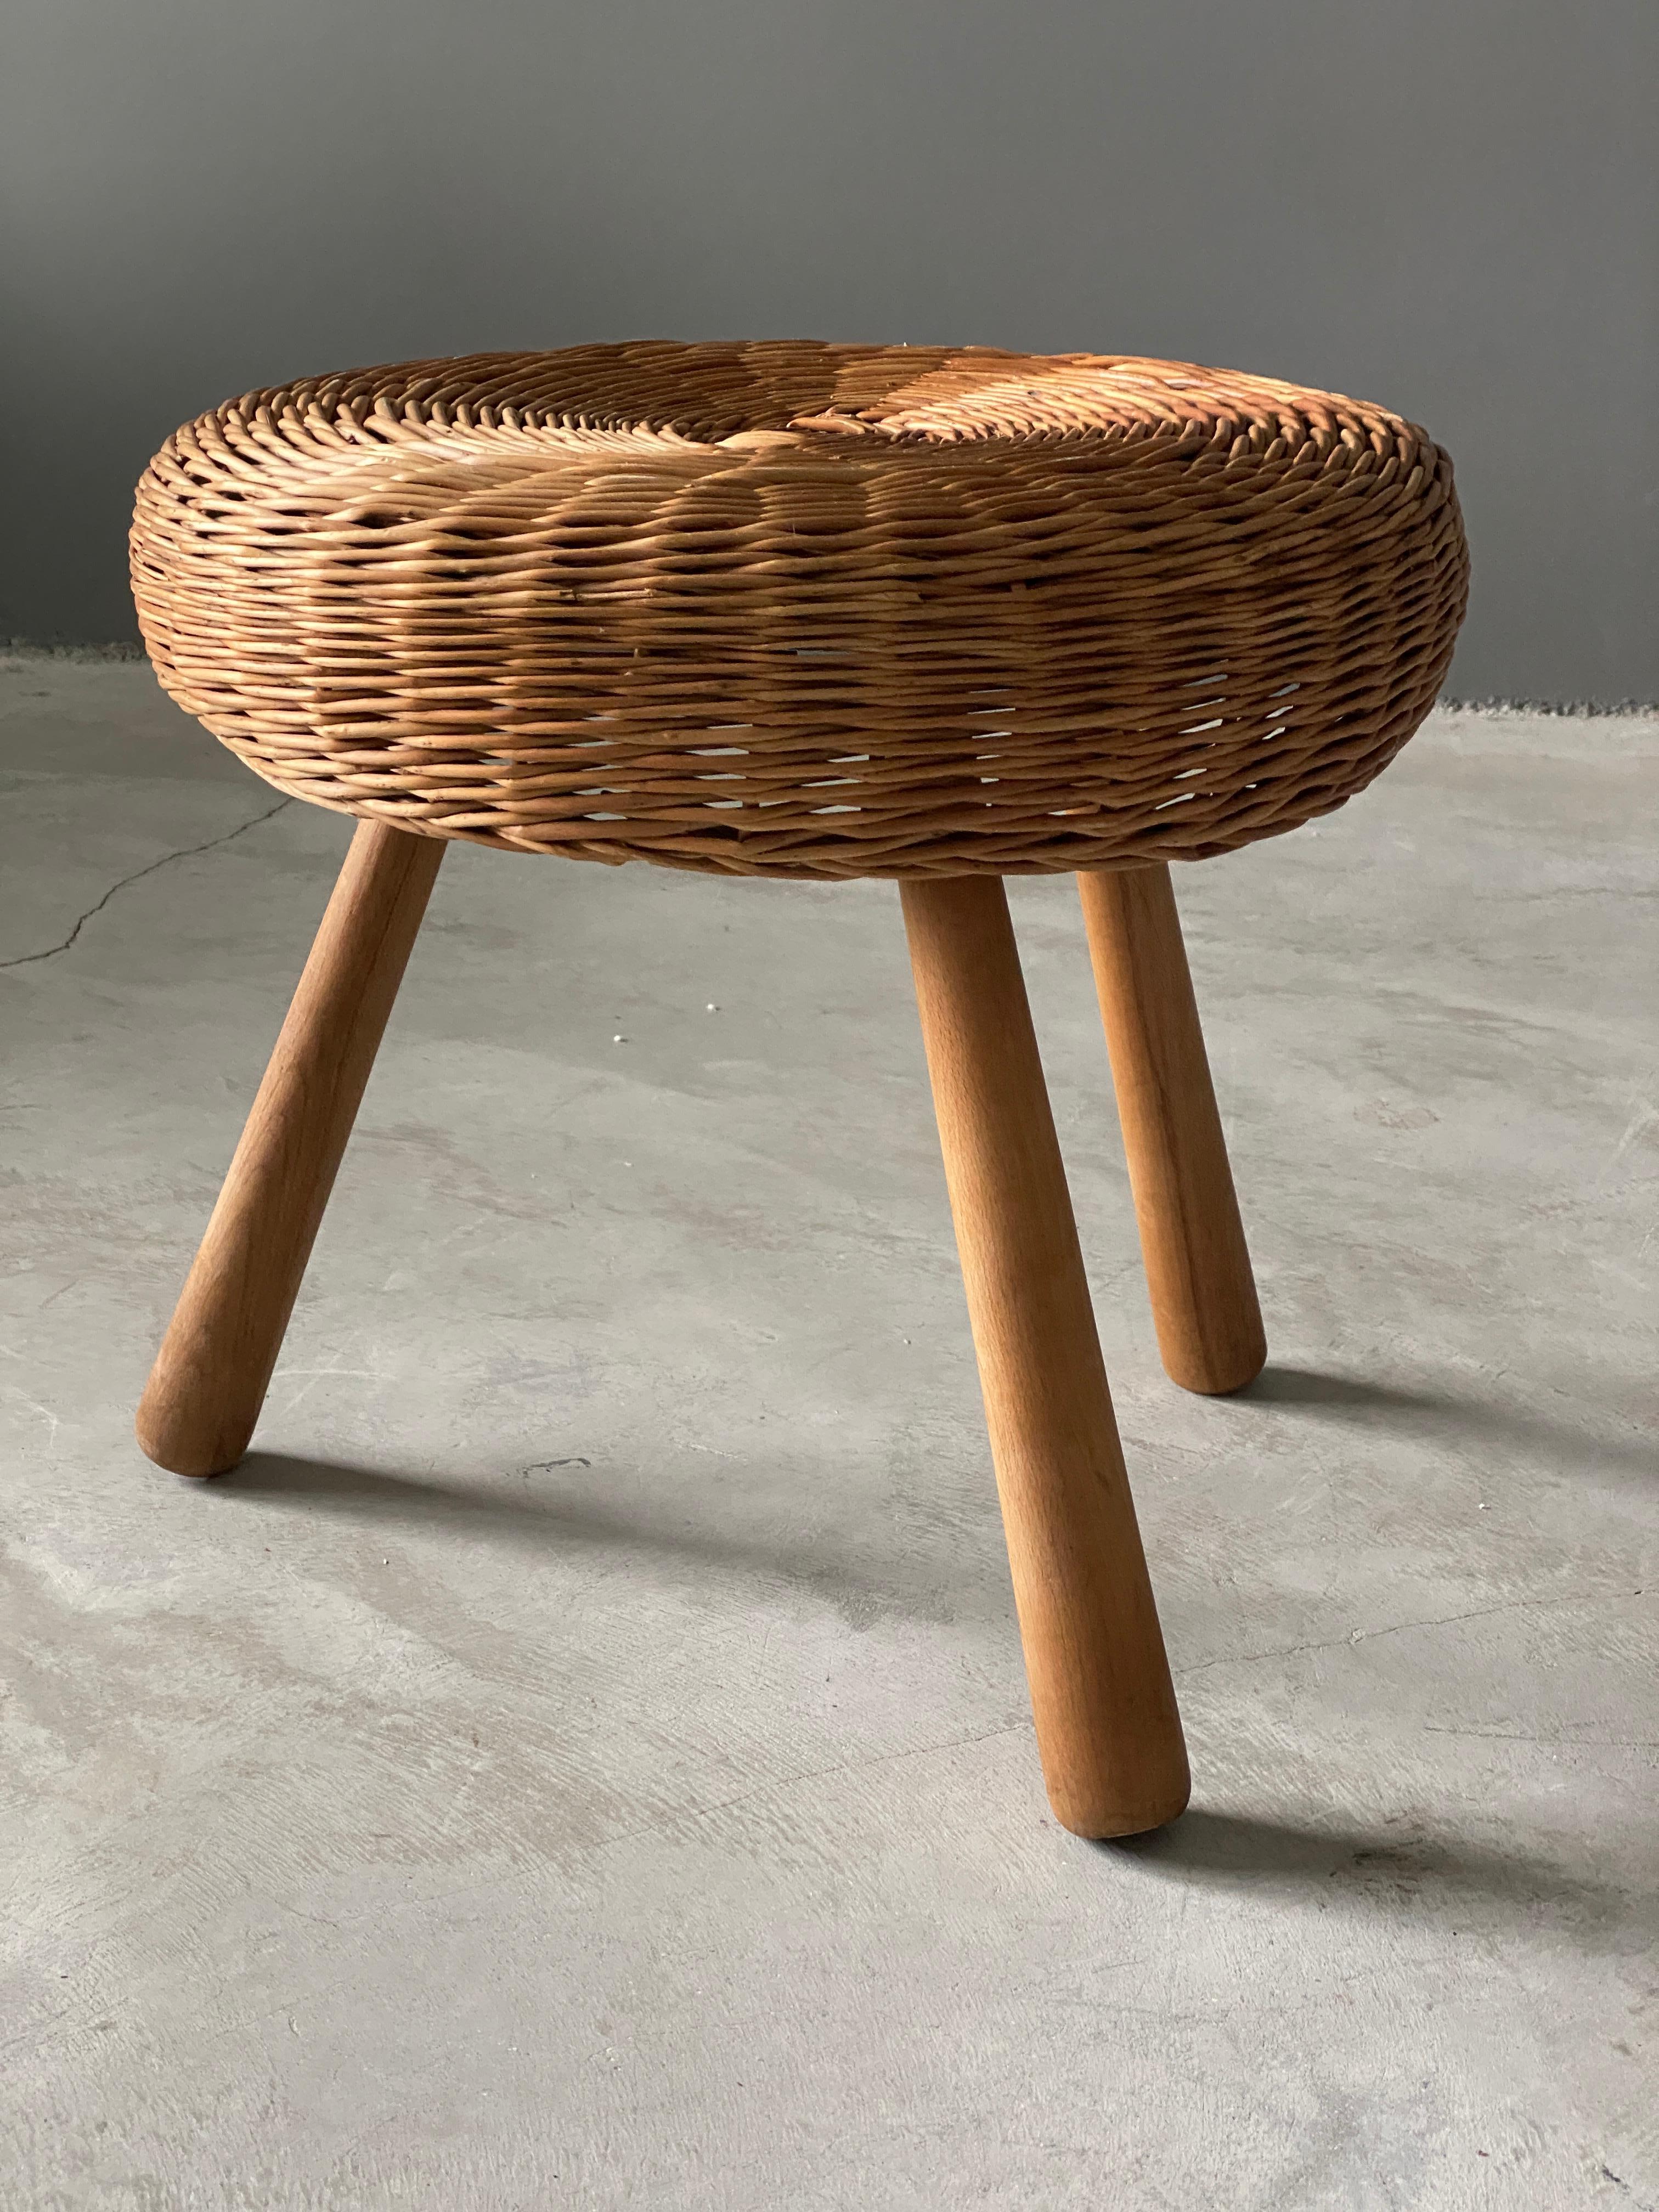 American Tony Paul 'Attribution' Large Stool, Woven Rattan (For client R.) 